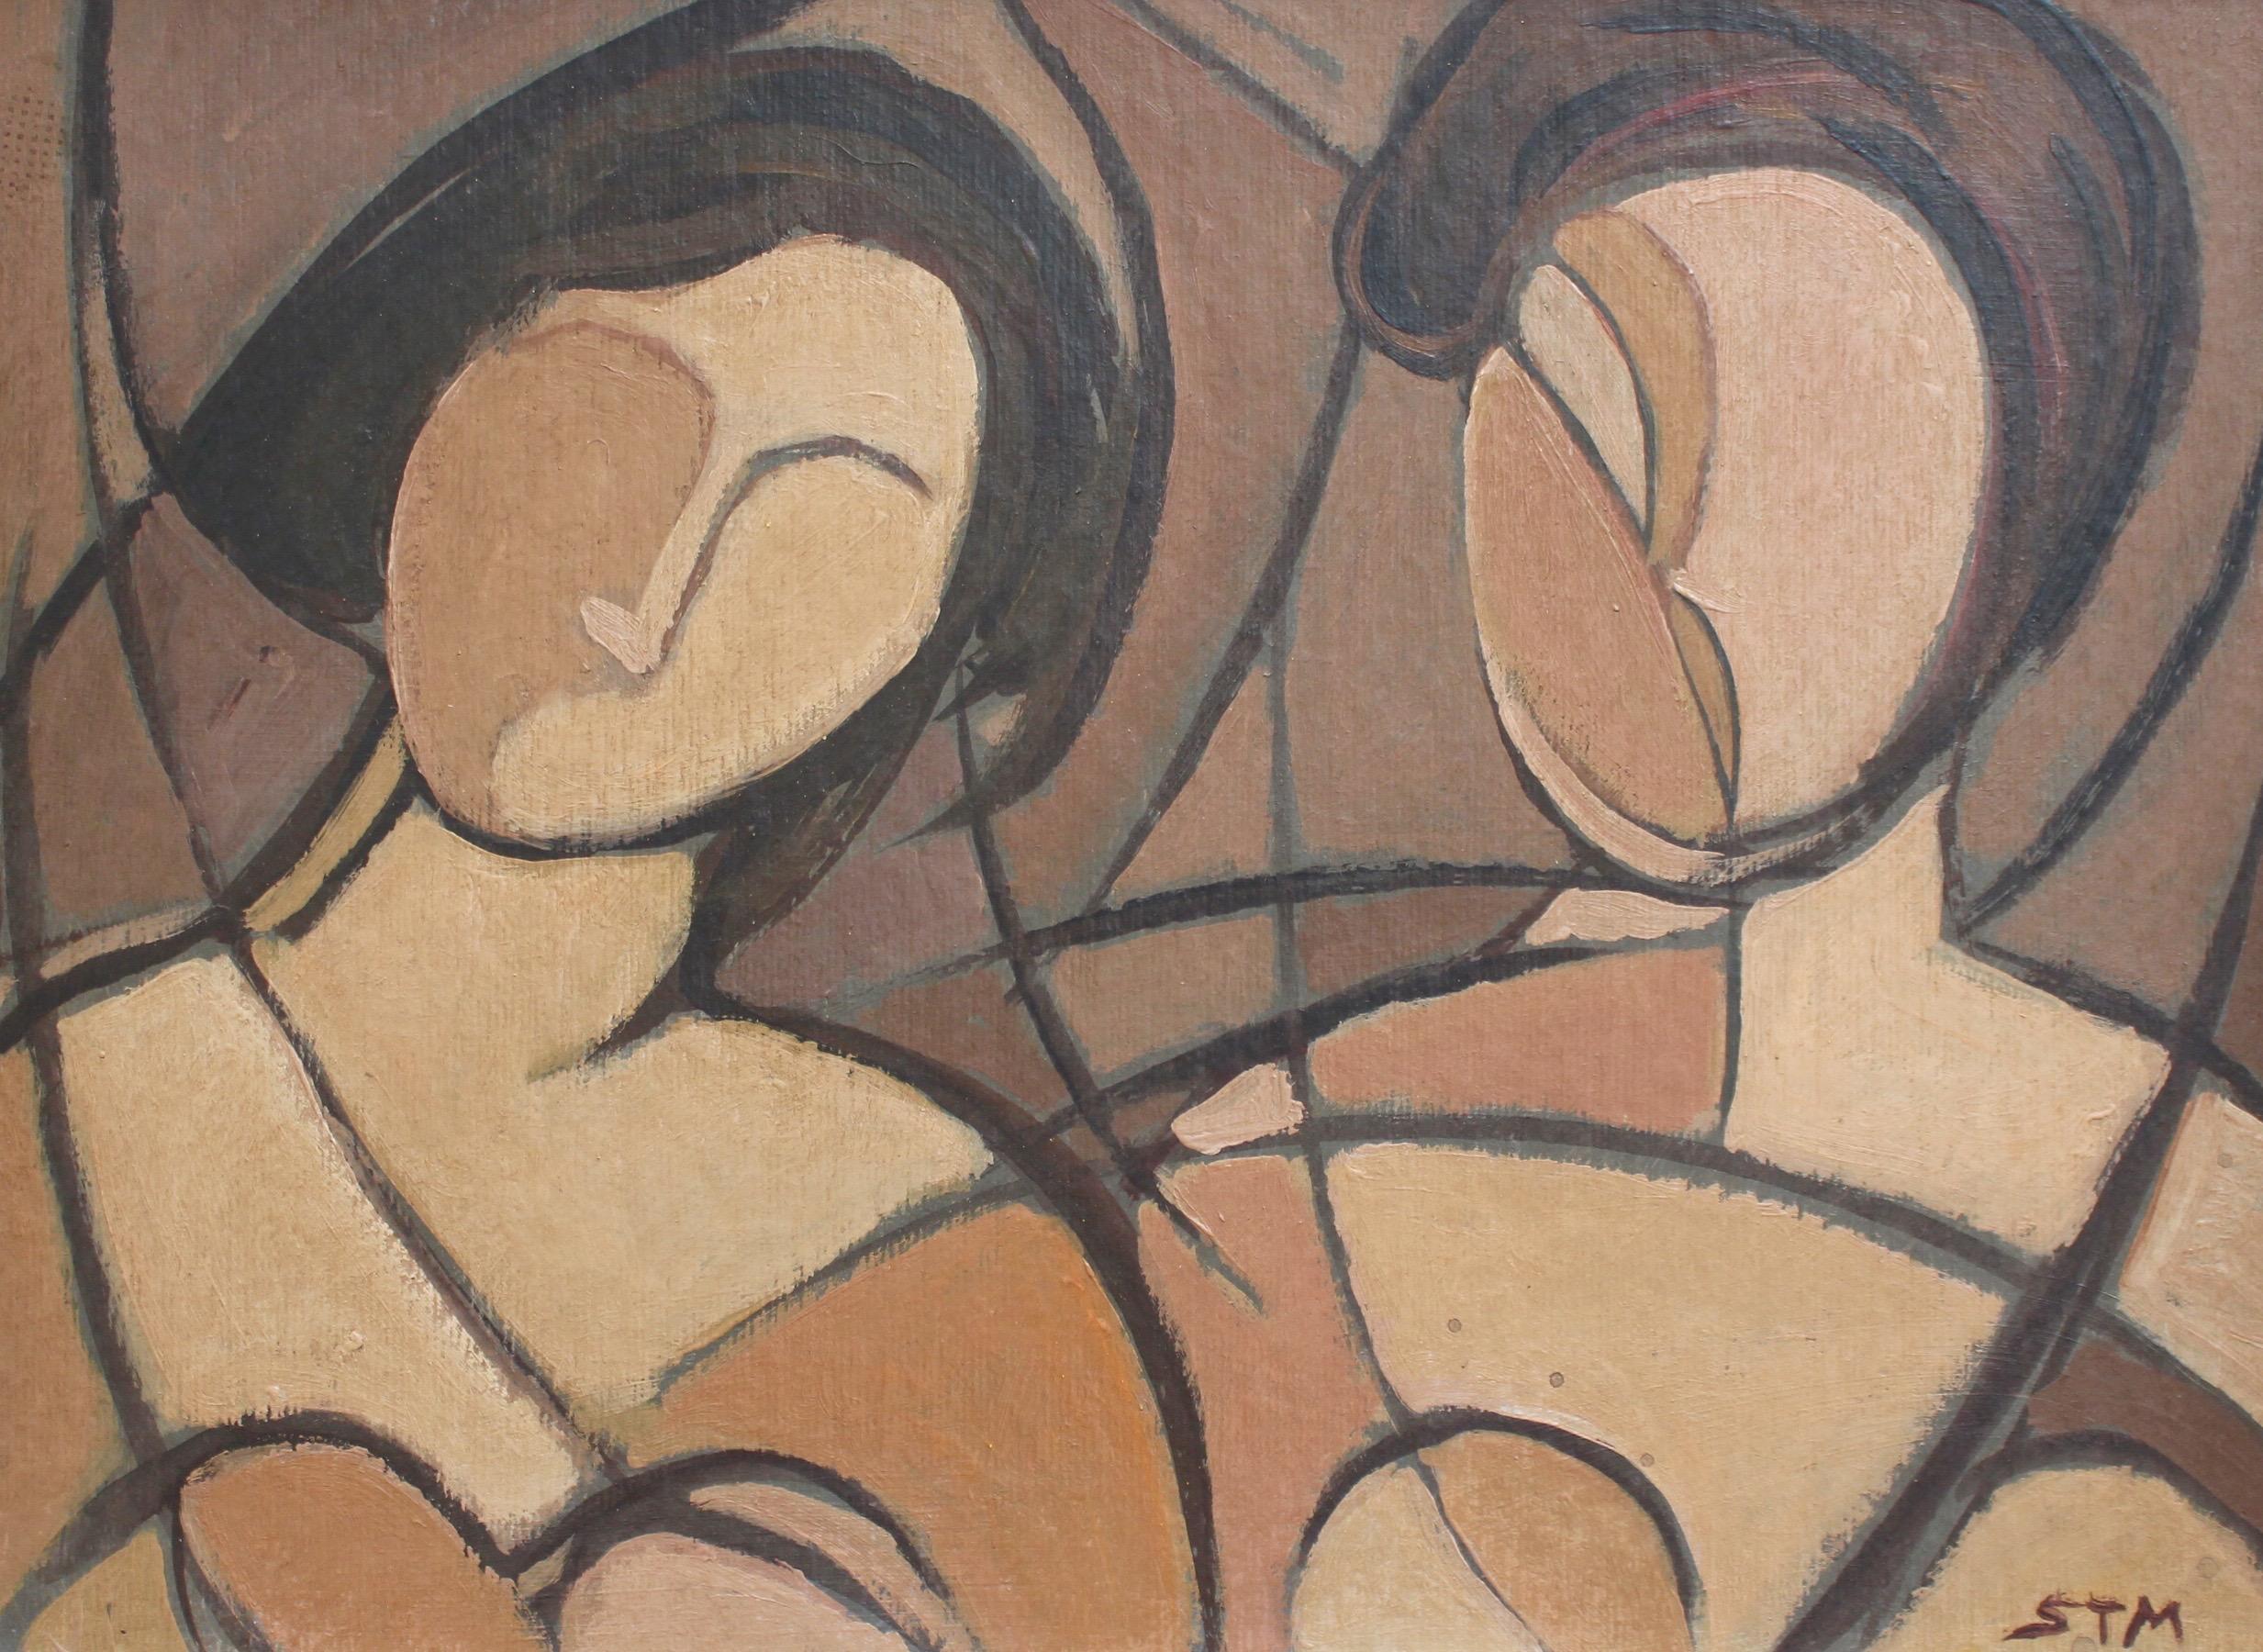 'Lost in the Shadows', oil on board, by STM (circa 1940s - 1960s). The artist with initials STM never fails to disappoint. In this painting the artist depicts two nudes with shadowed faces along with the angles, curves and jagged shards that appear